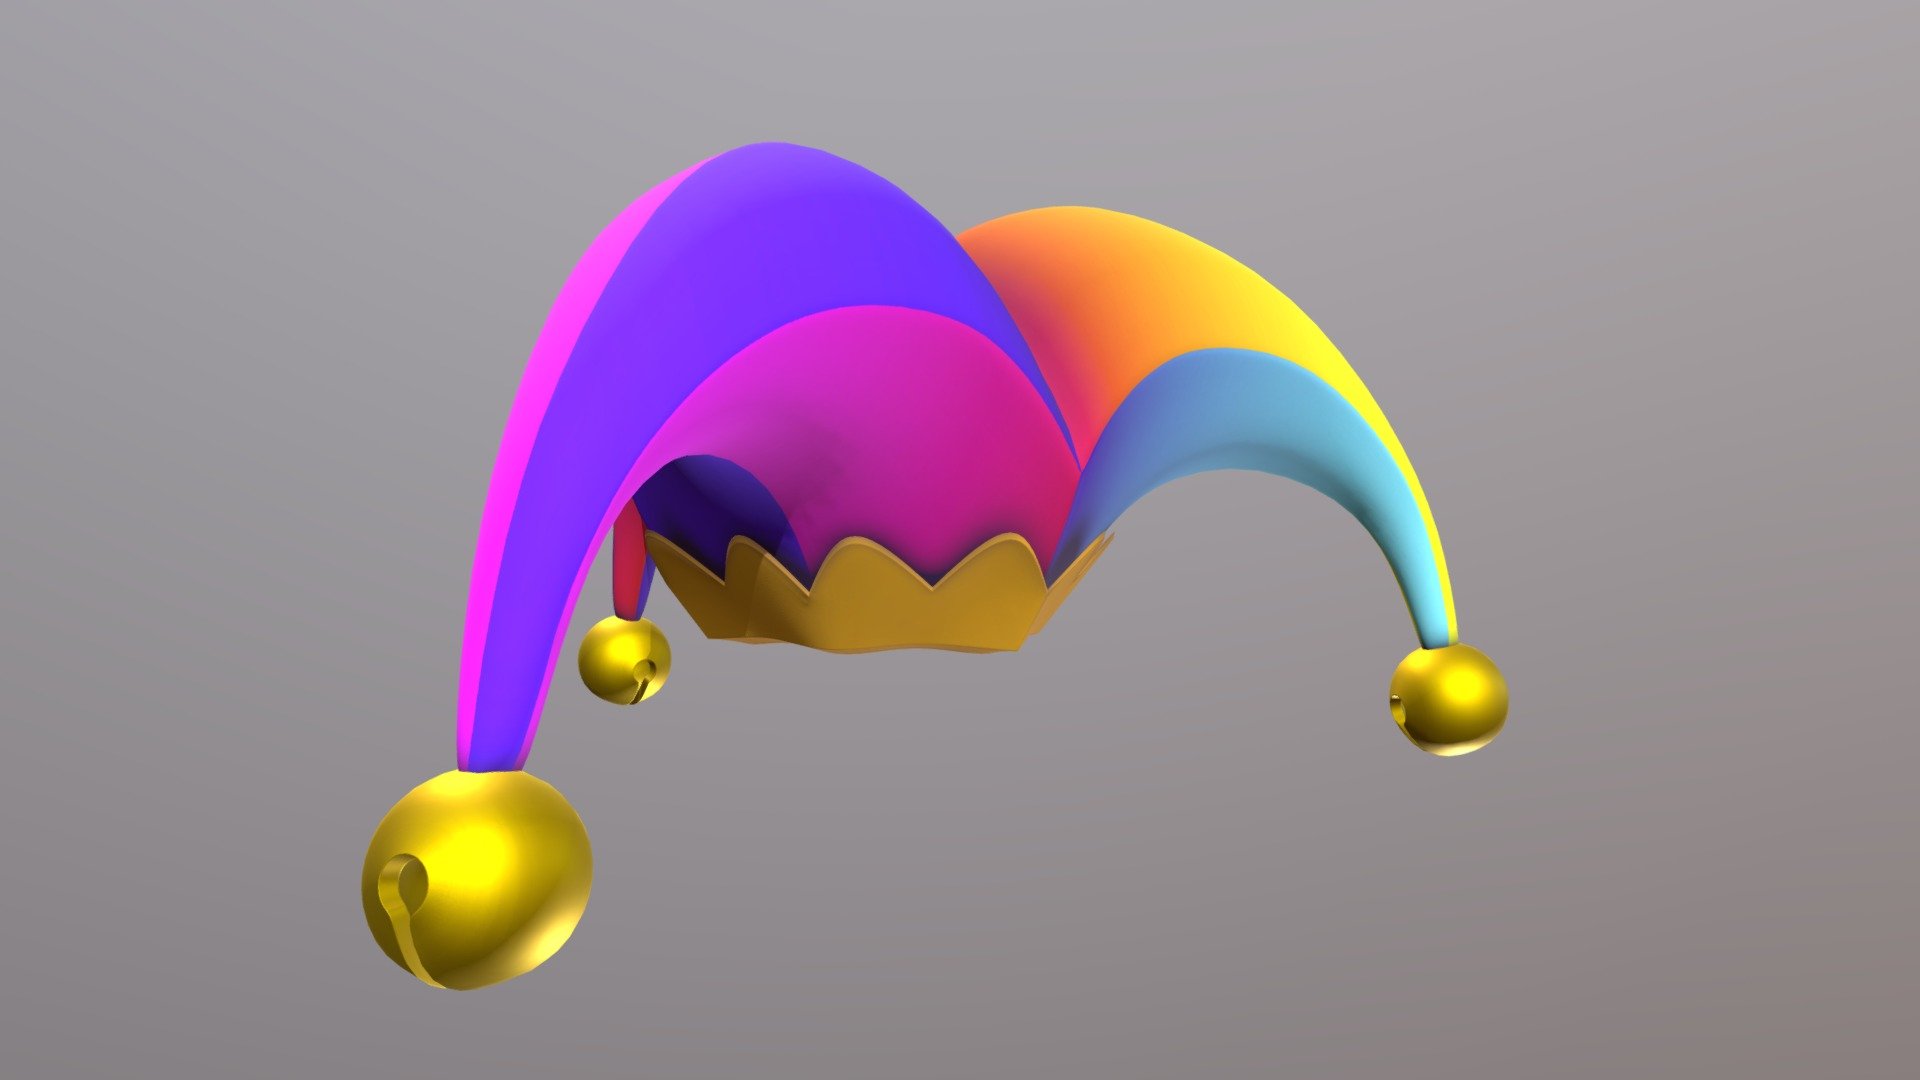 Jester hat with clean surfaces and stylized effects. Part of a set of 3. All versions share the same model, only the texturing is different.

Modeled in Blender, then textured in Substance 3D Painter 3d model